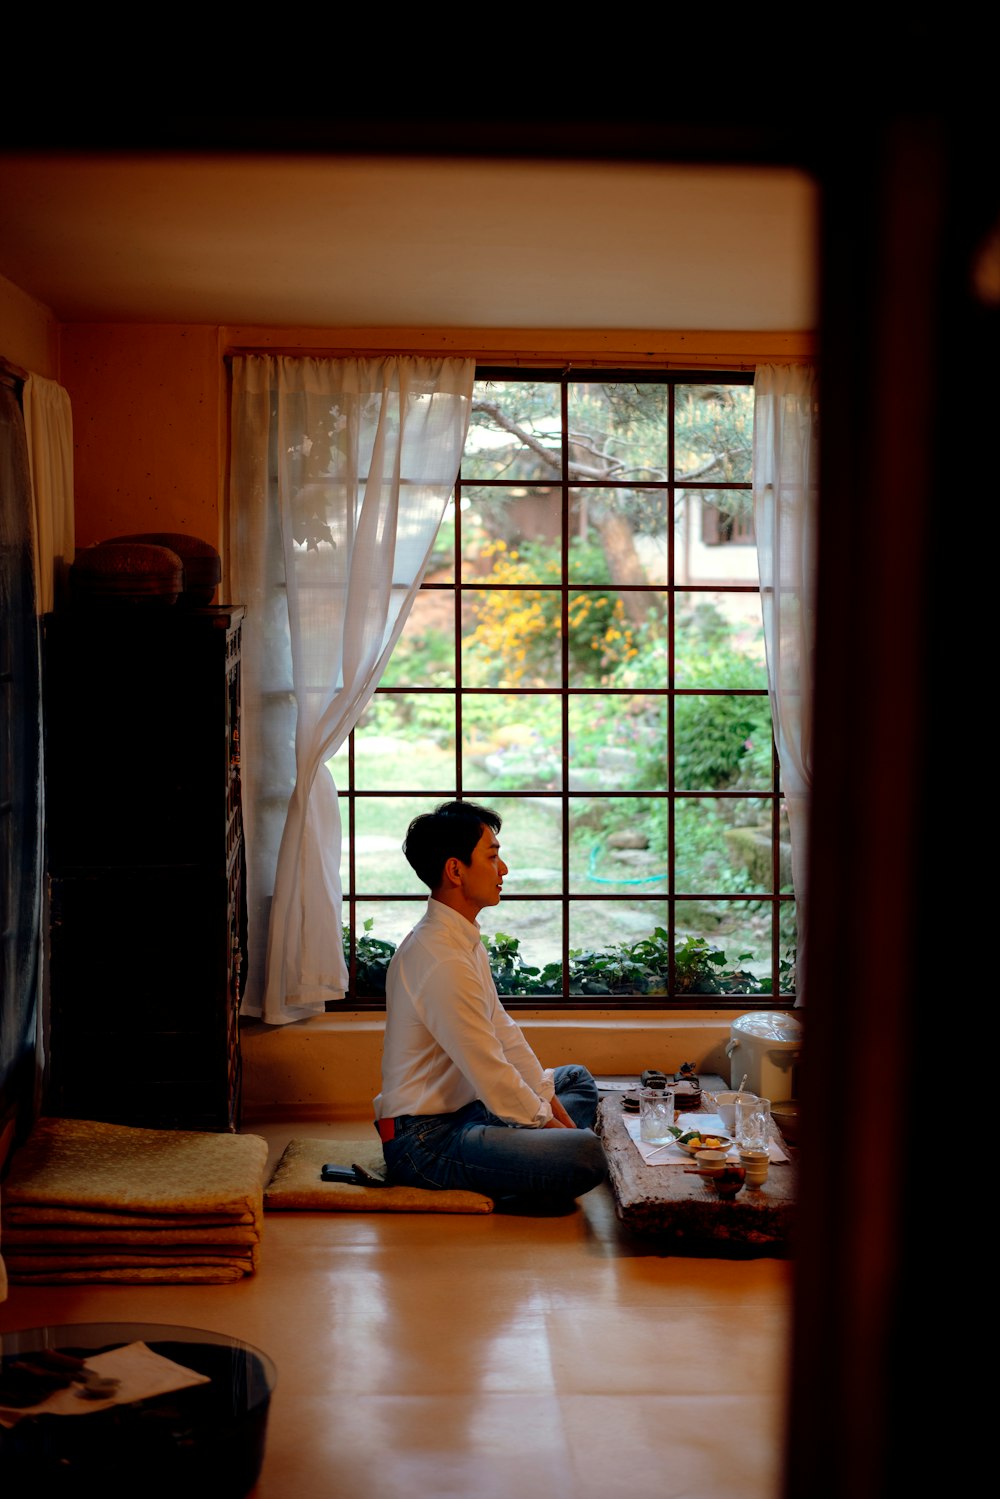 man sitting on floor by table and window